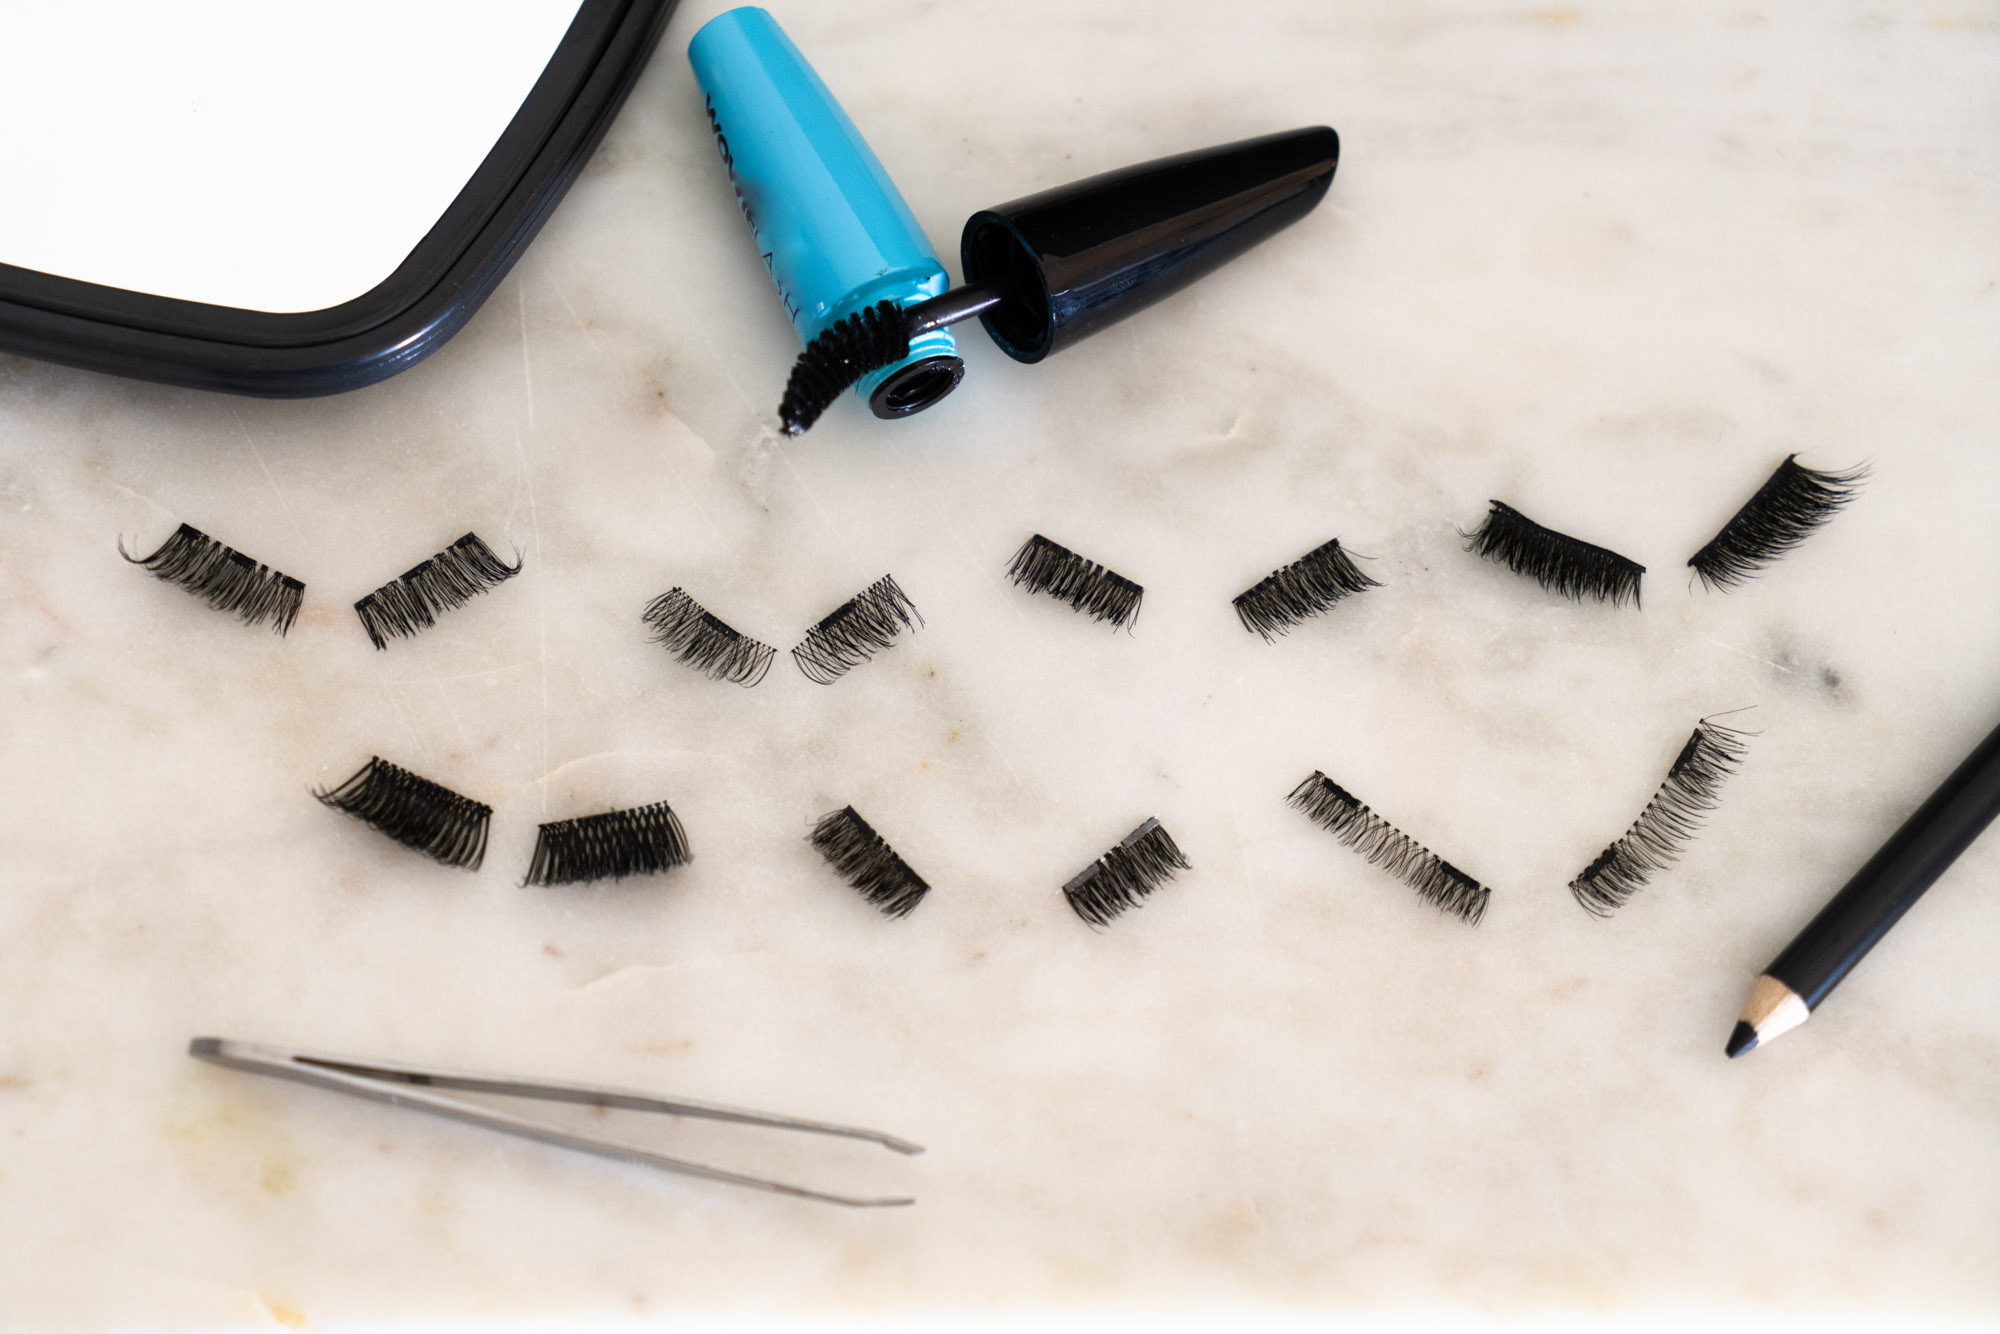 Group of magnetic eyelashes on a countertop